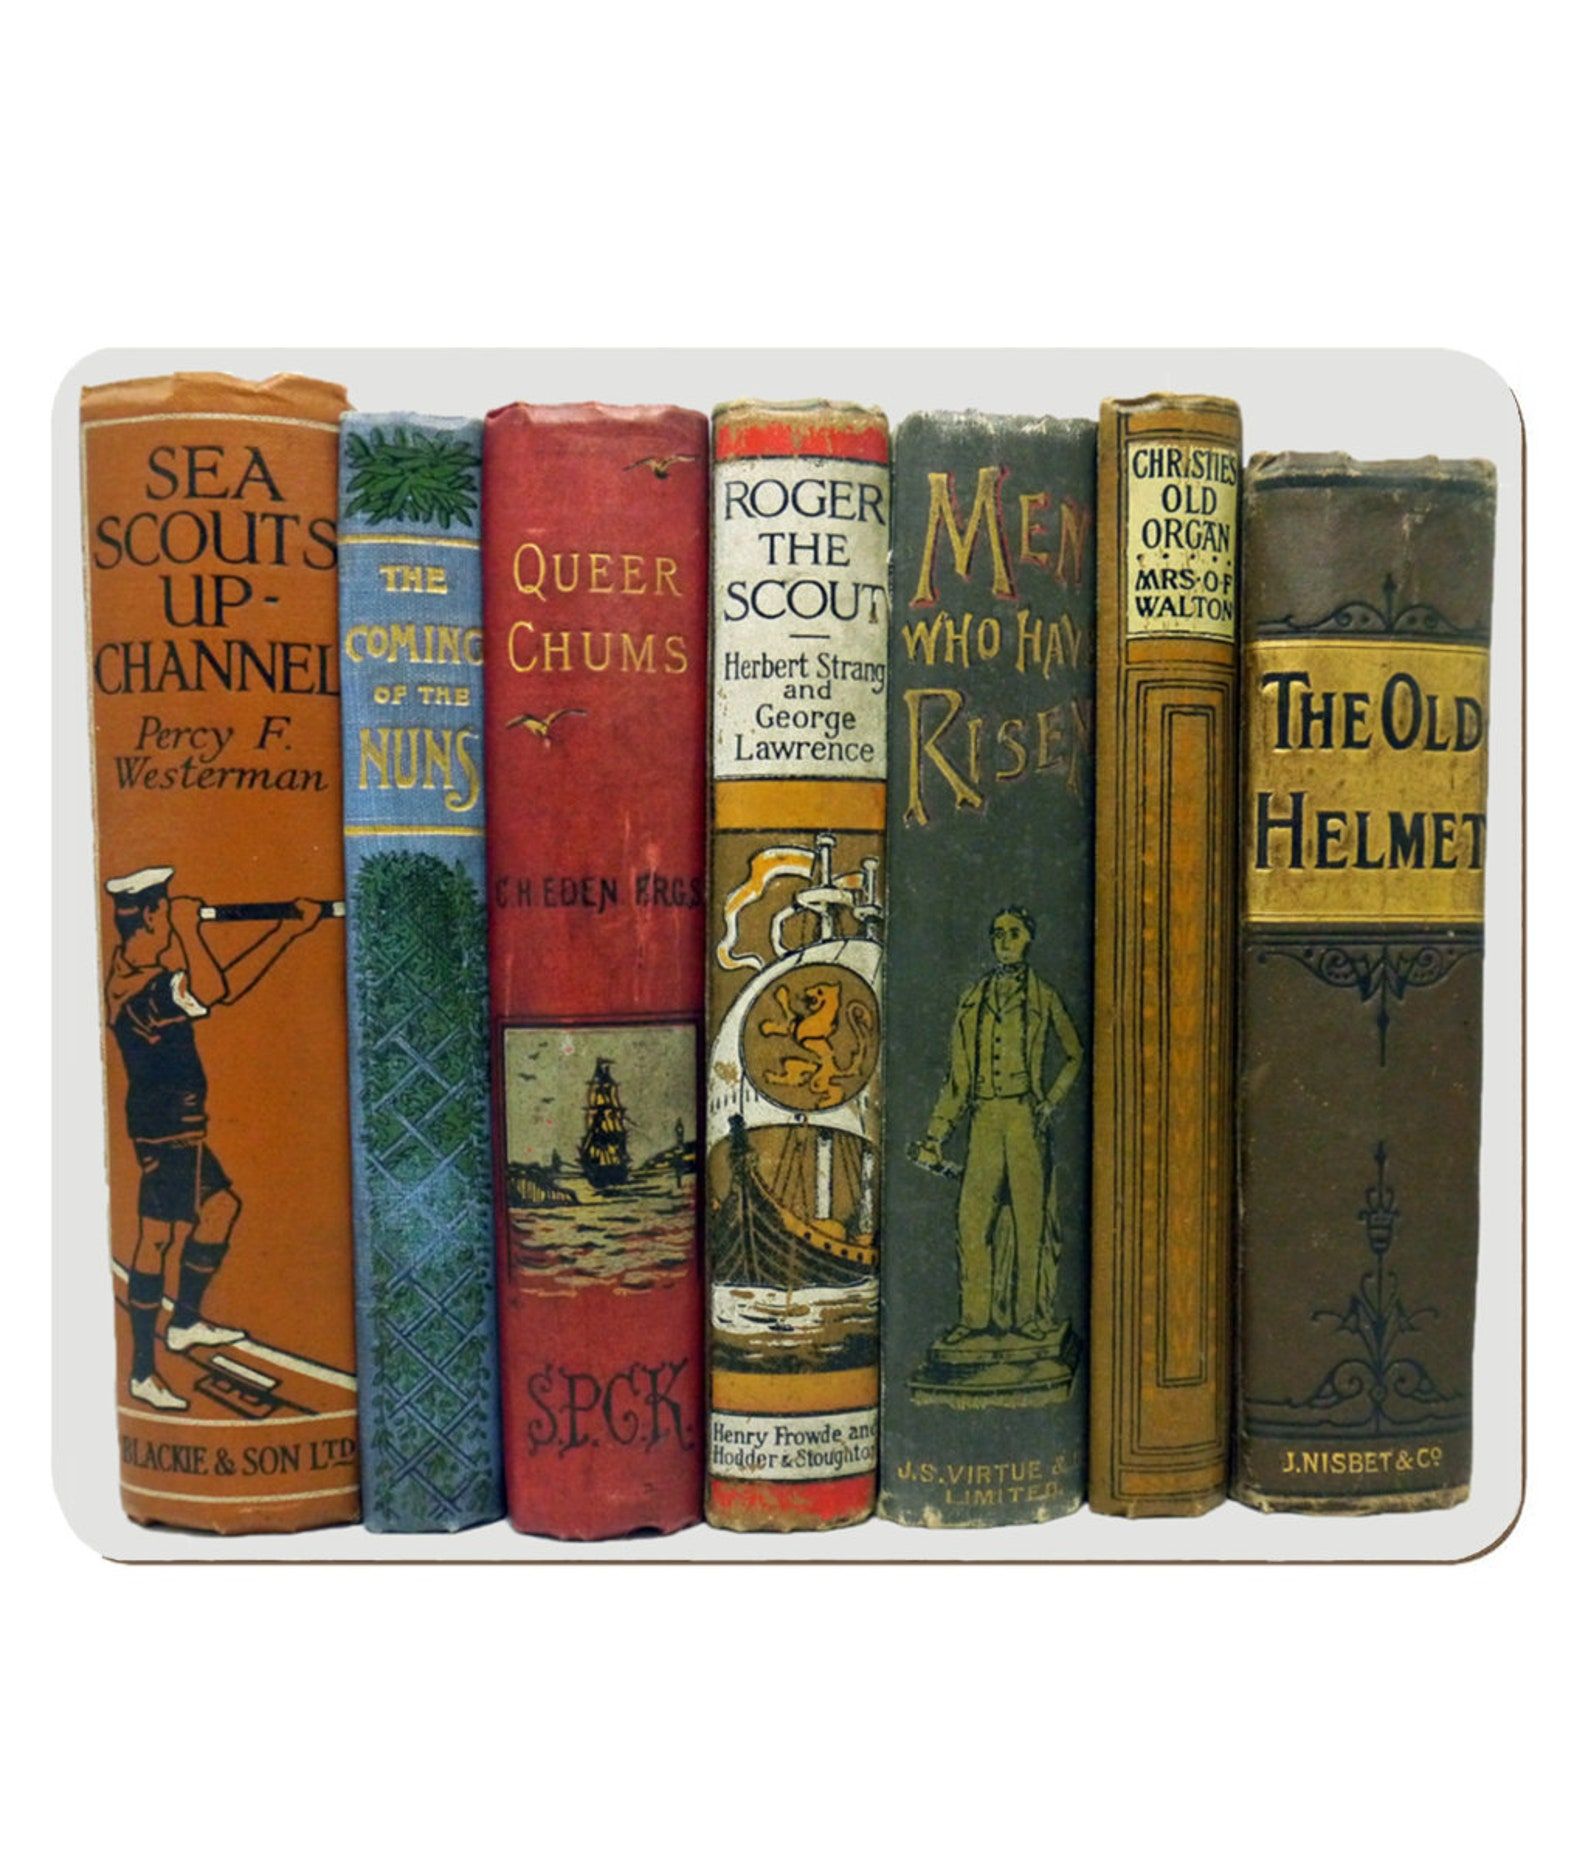 A white placemat with a collection of six vintage books. The titles of these books are, "Scouts up-channel" by Percy F. Westerman. "The Coming of the Nuns," 'Queer Chums," by Charles Henry Eden, W. H. Oberend. "Roger the Scout," by Herbert Stranger and George Lawrence. "Men Who Have Resentment," by James Hogg. "Christie's Old Organ," by Amy Catherine Walton. "The Old Helmet," by J. Nisbet.